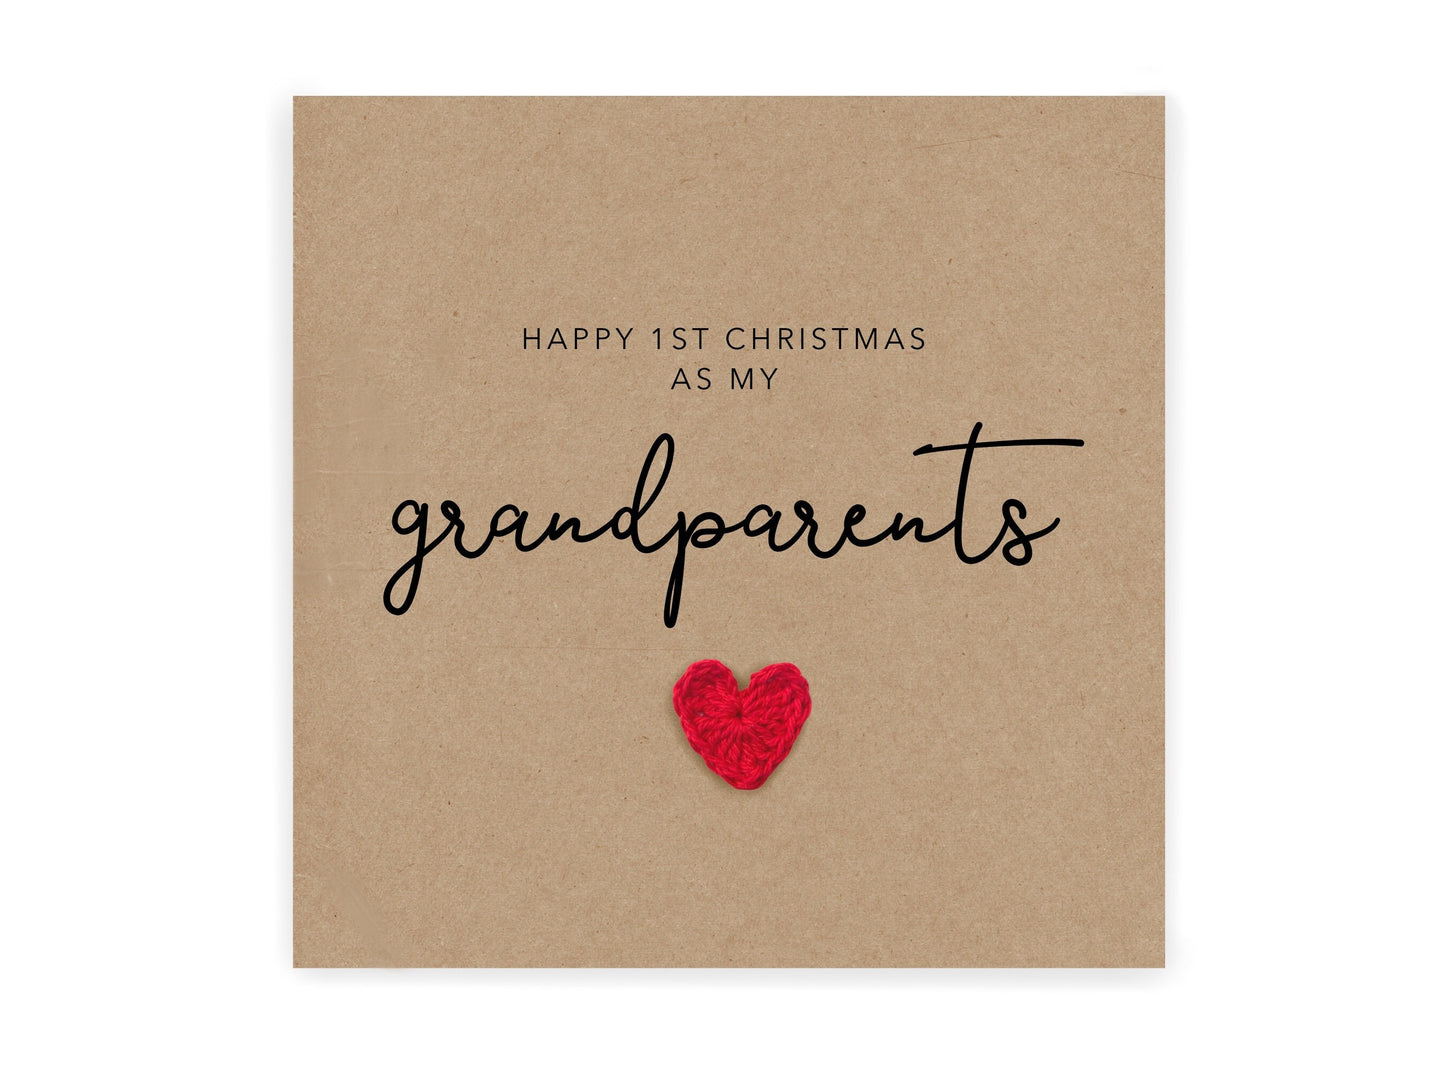 Happy First Christmas As My Grandparents, First Christmas Card for Grandparents Christmas Card Baby, 1st Christmas, Christmas Card from baby